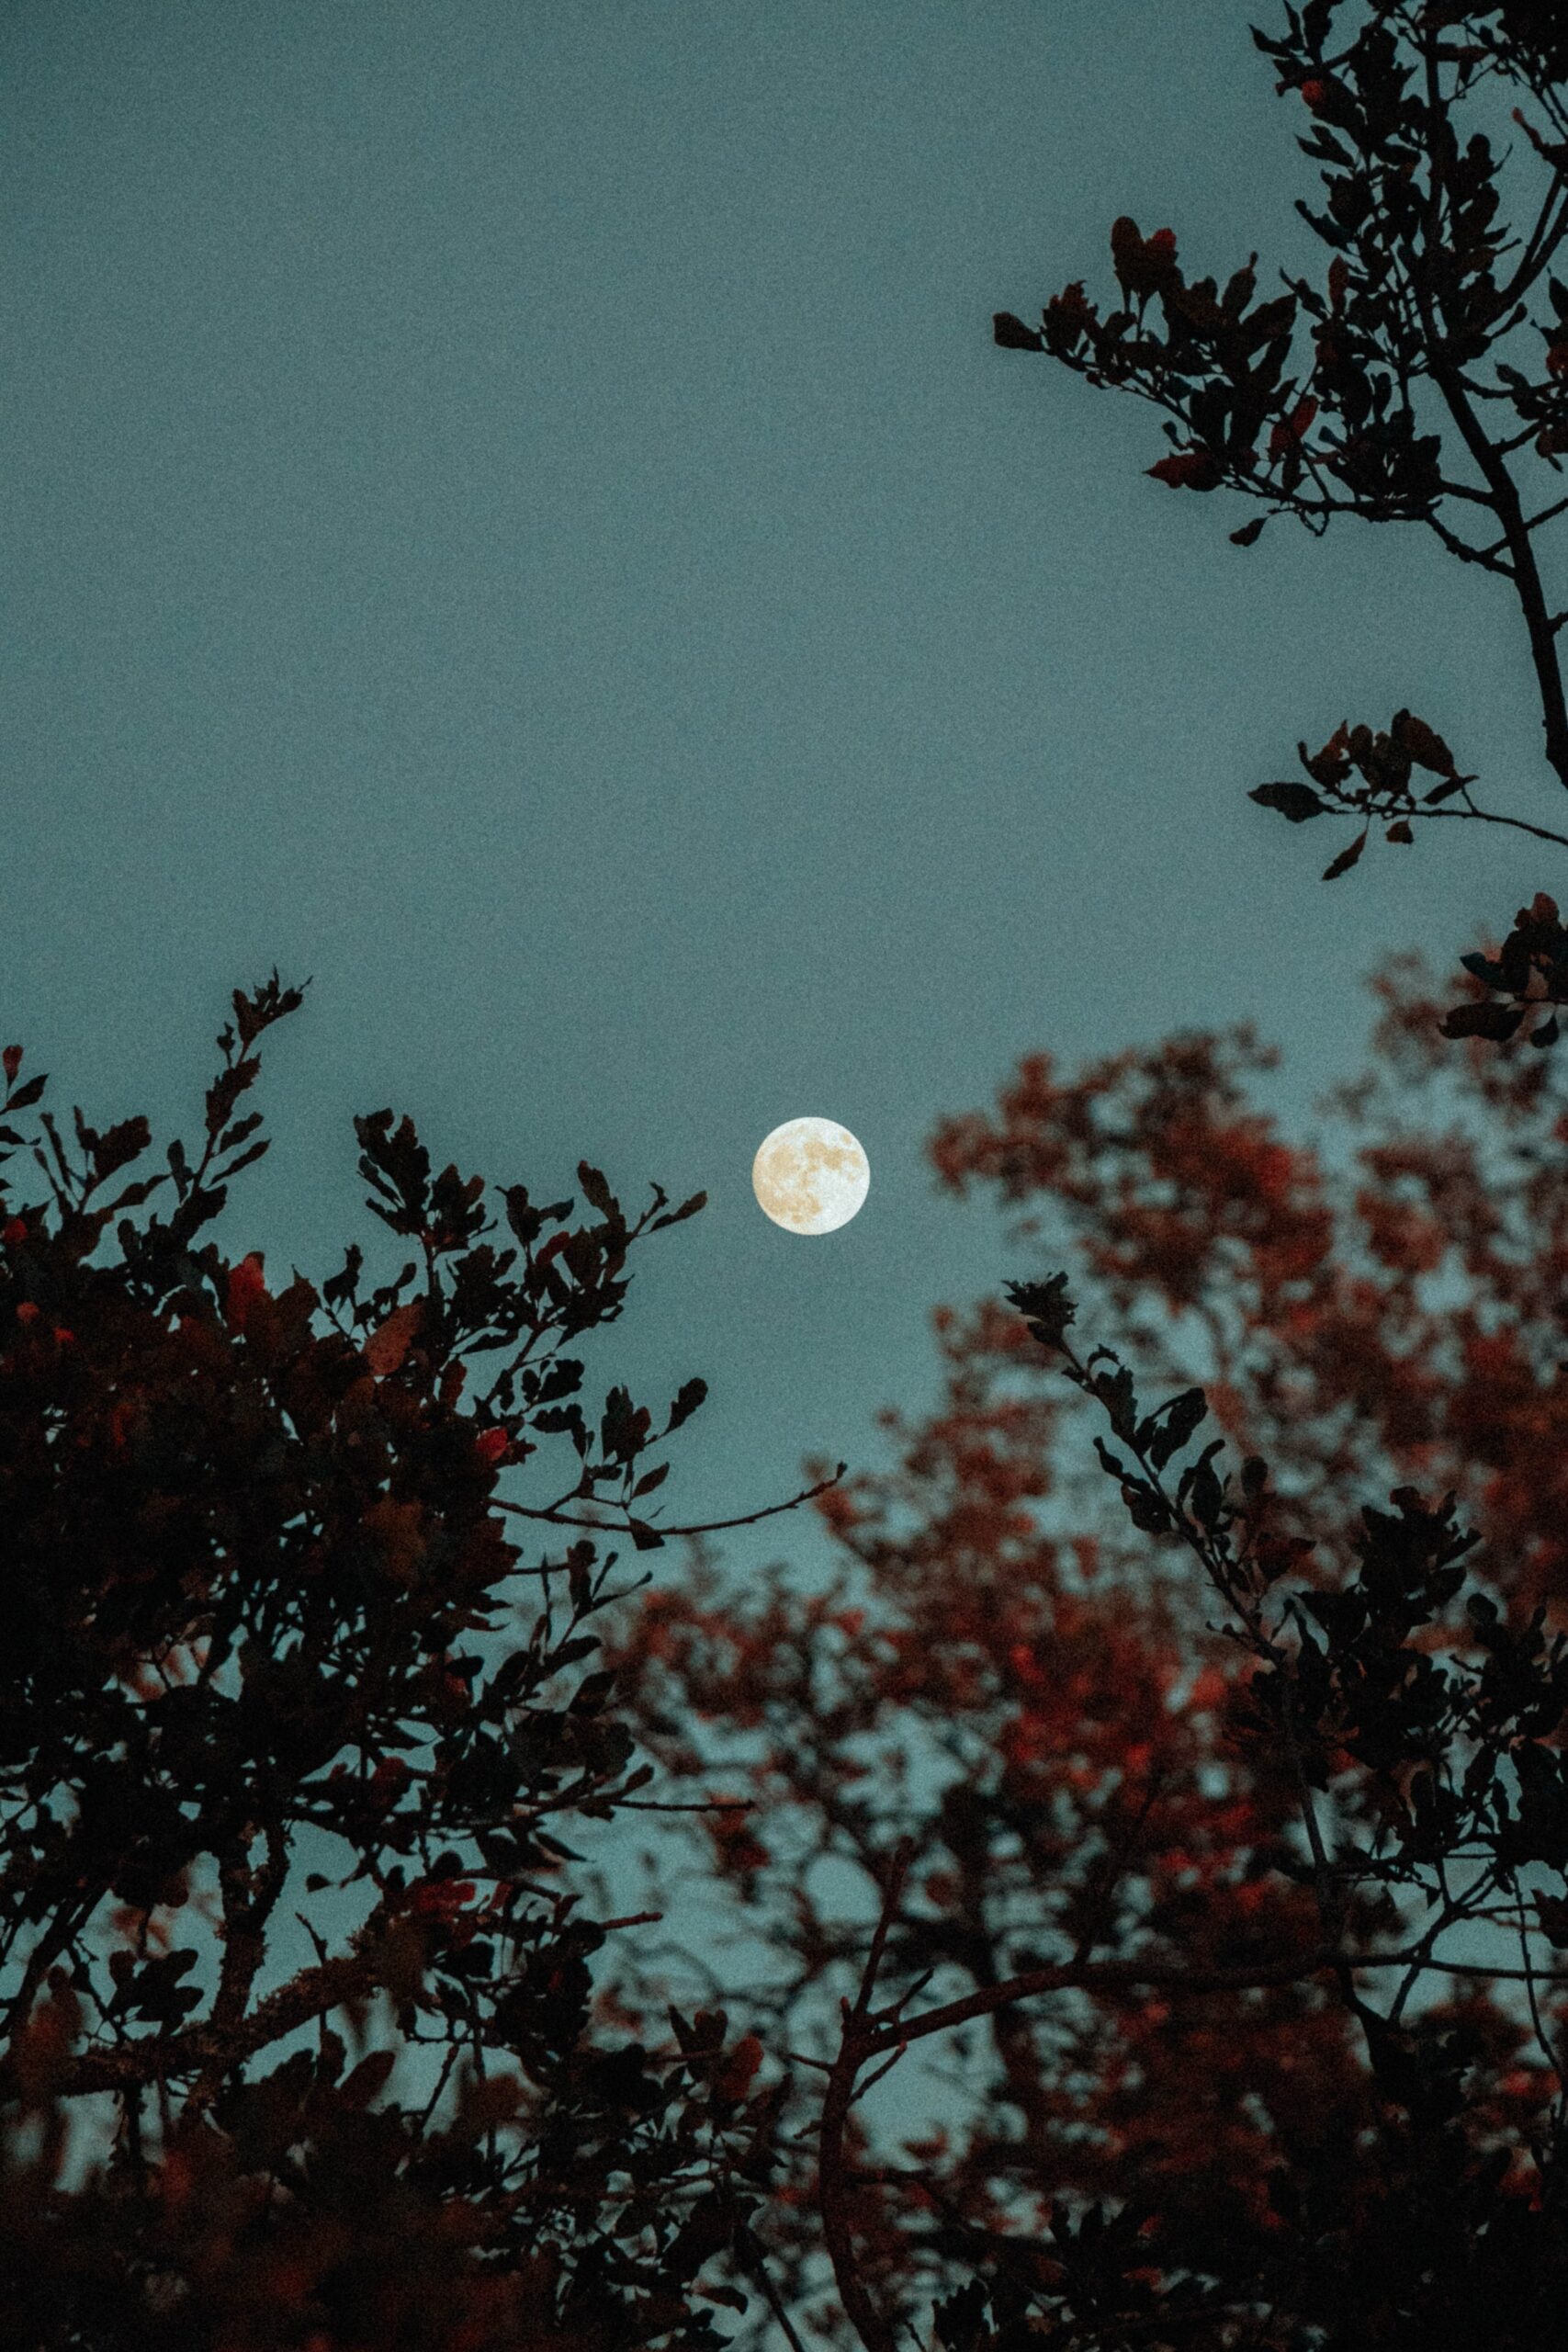 self reflection questions and rituals for a full moon